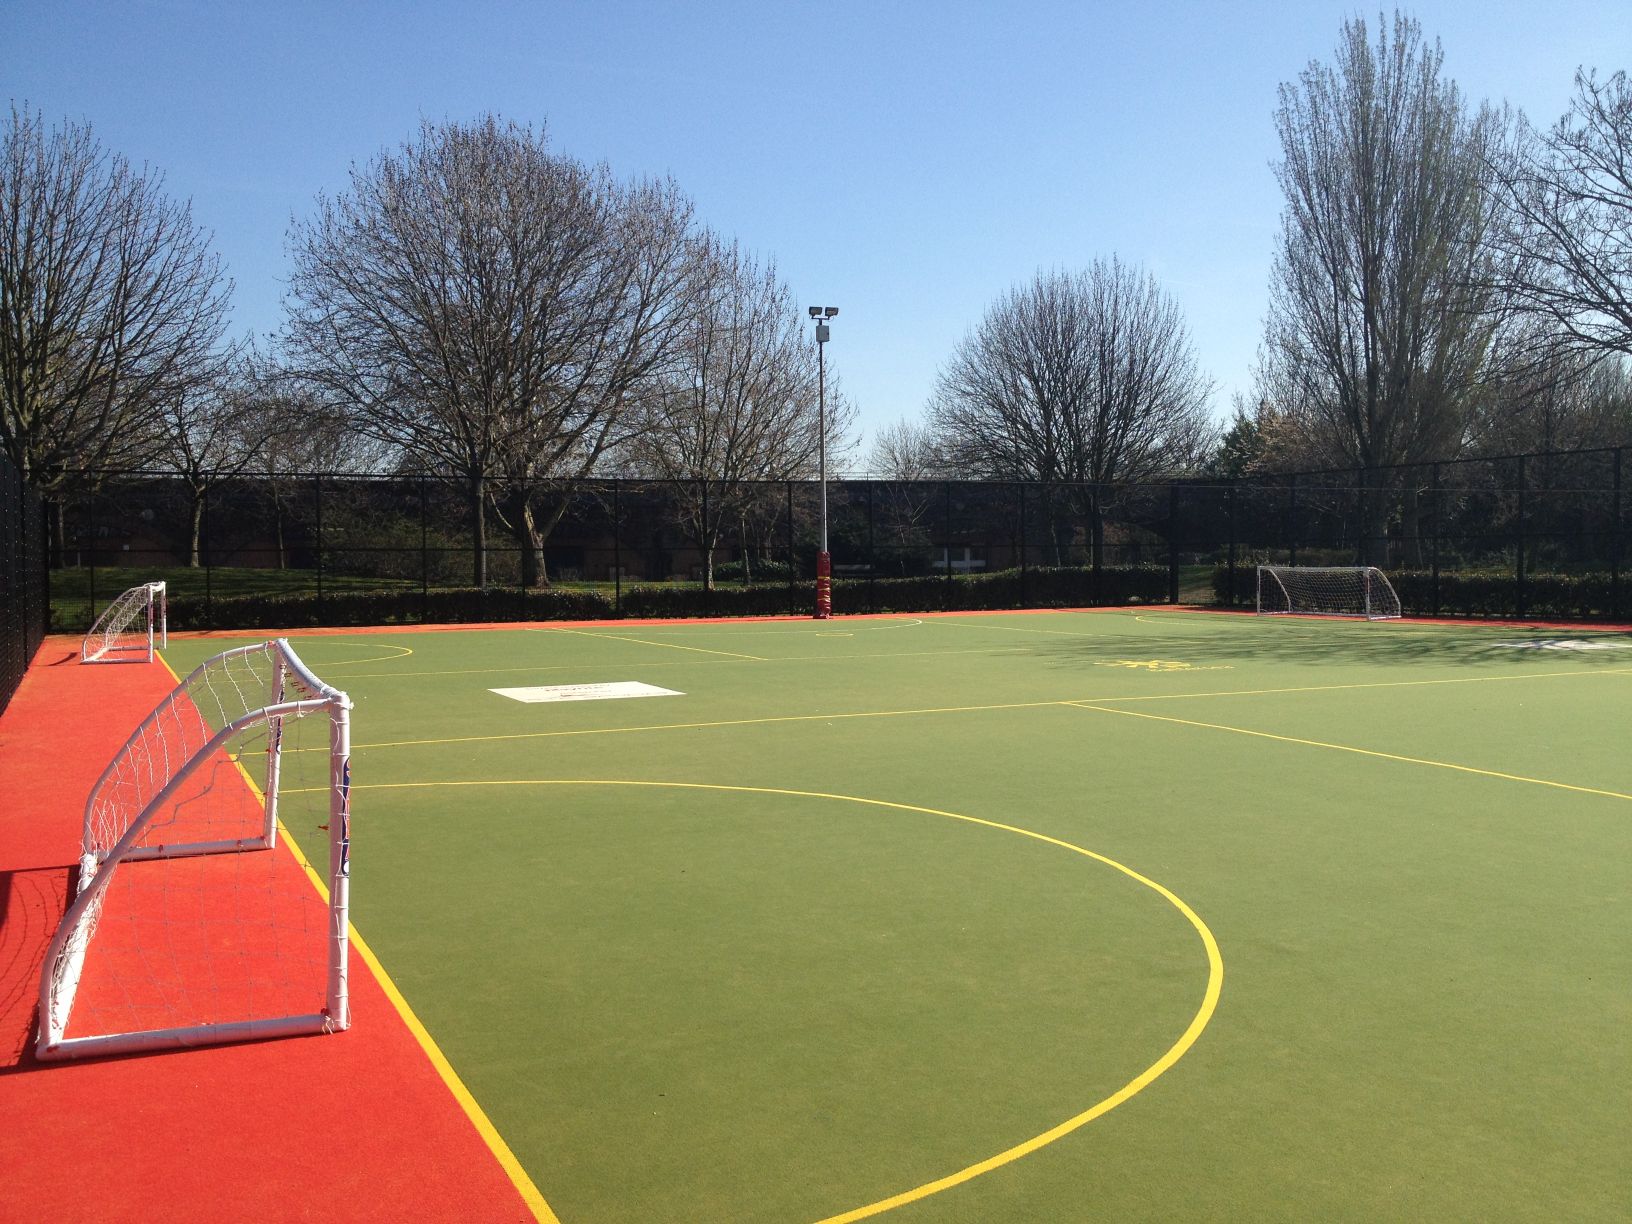 Matchplay 2 pitches can be finished with customised markings, or even permanently inlaid with markings if required.